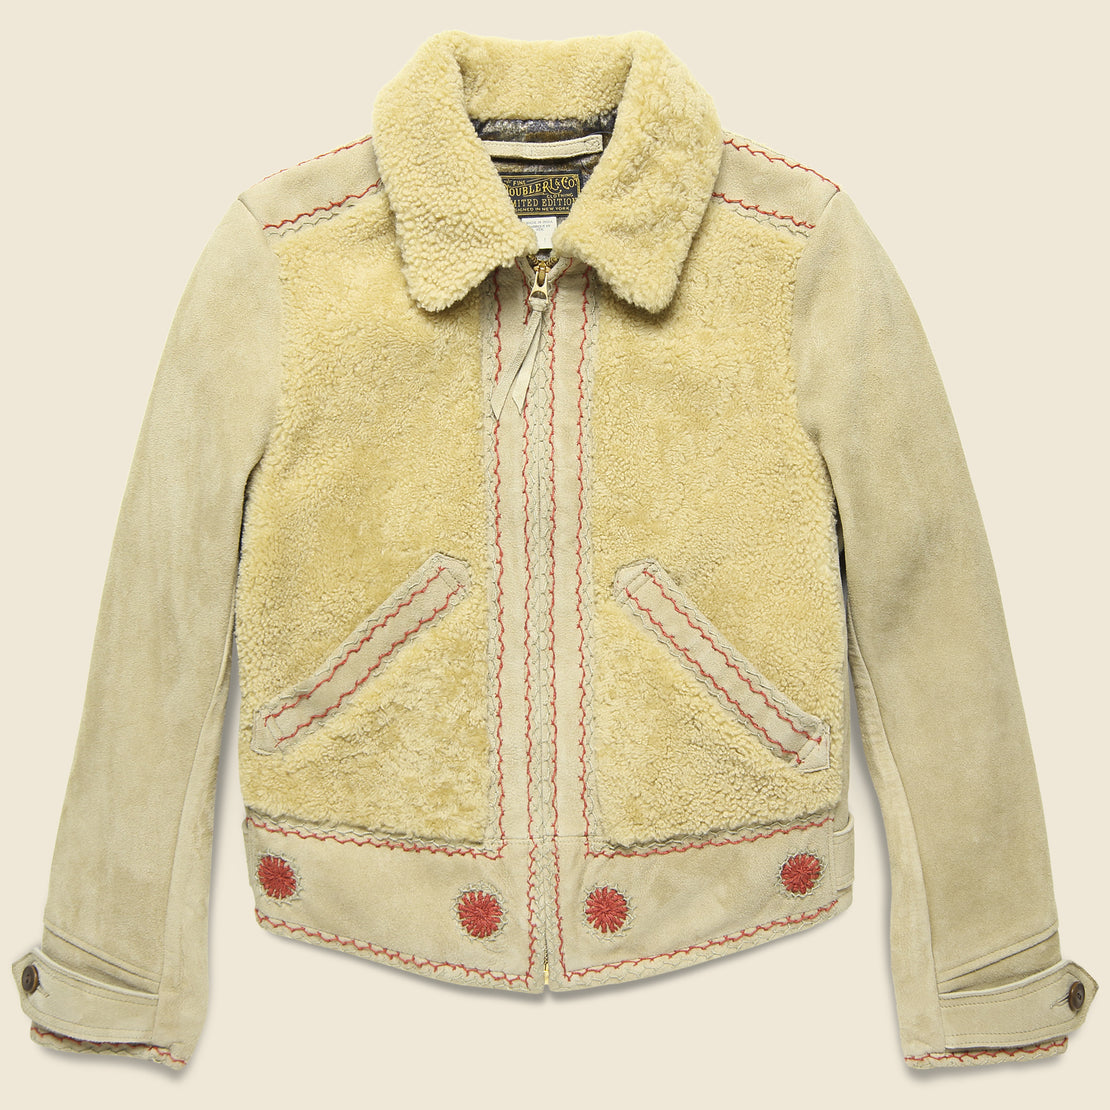 RRL Williams Shearling Embroidered Suede Jacket - Cream